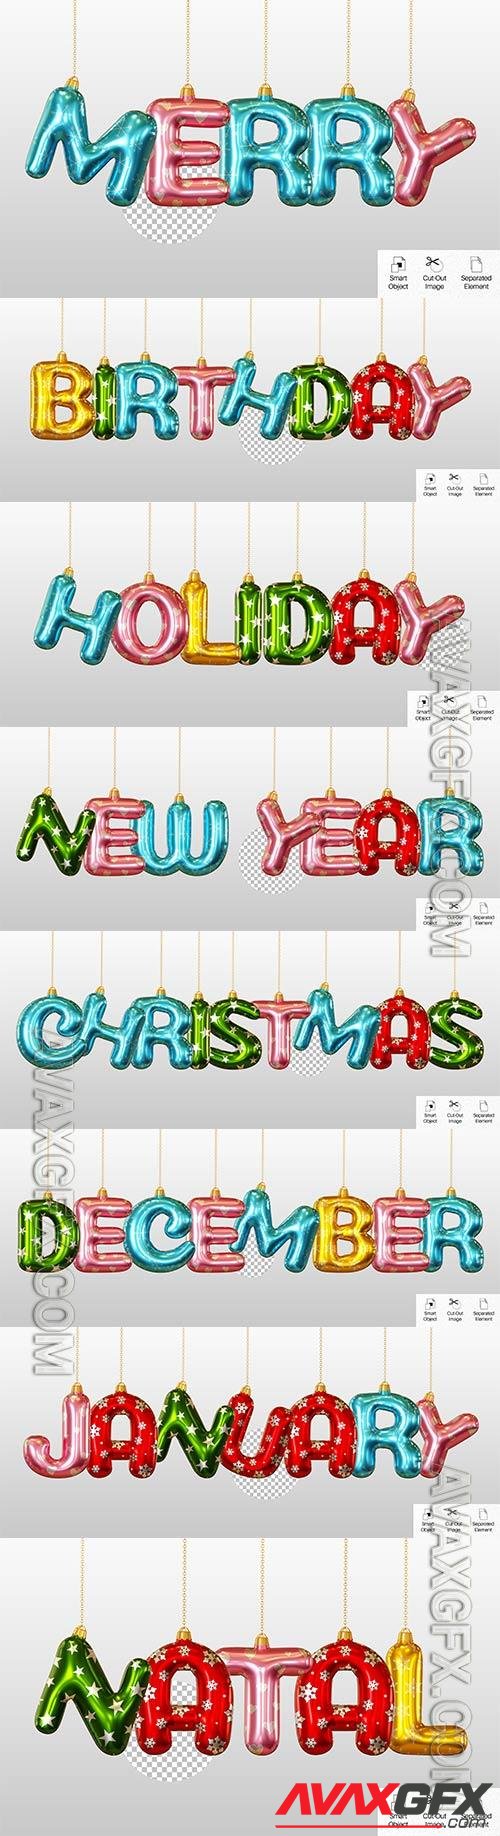 Holiday greeting word 3d text effect render psd